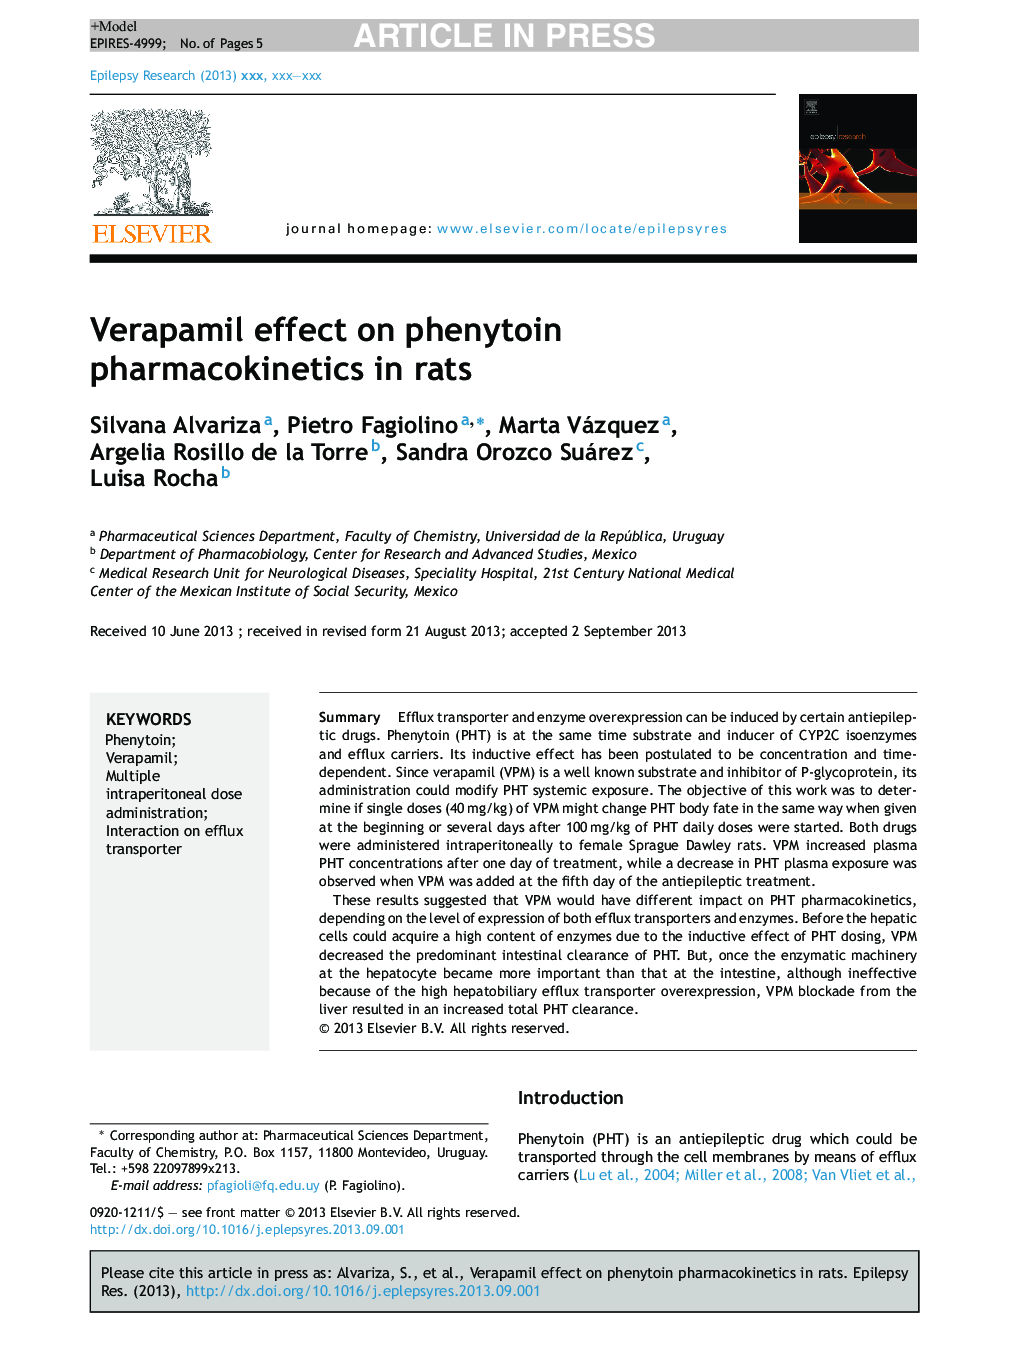 Verapamil effect on phenytoin pharmacokinetics in rats